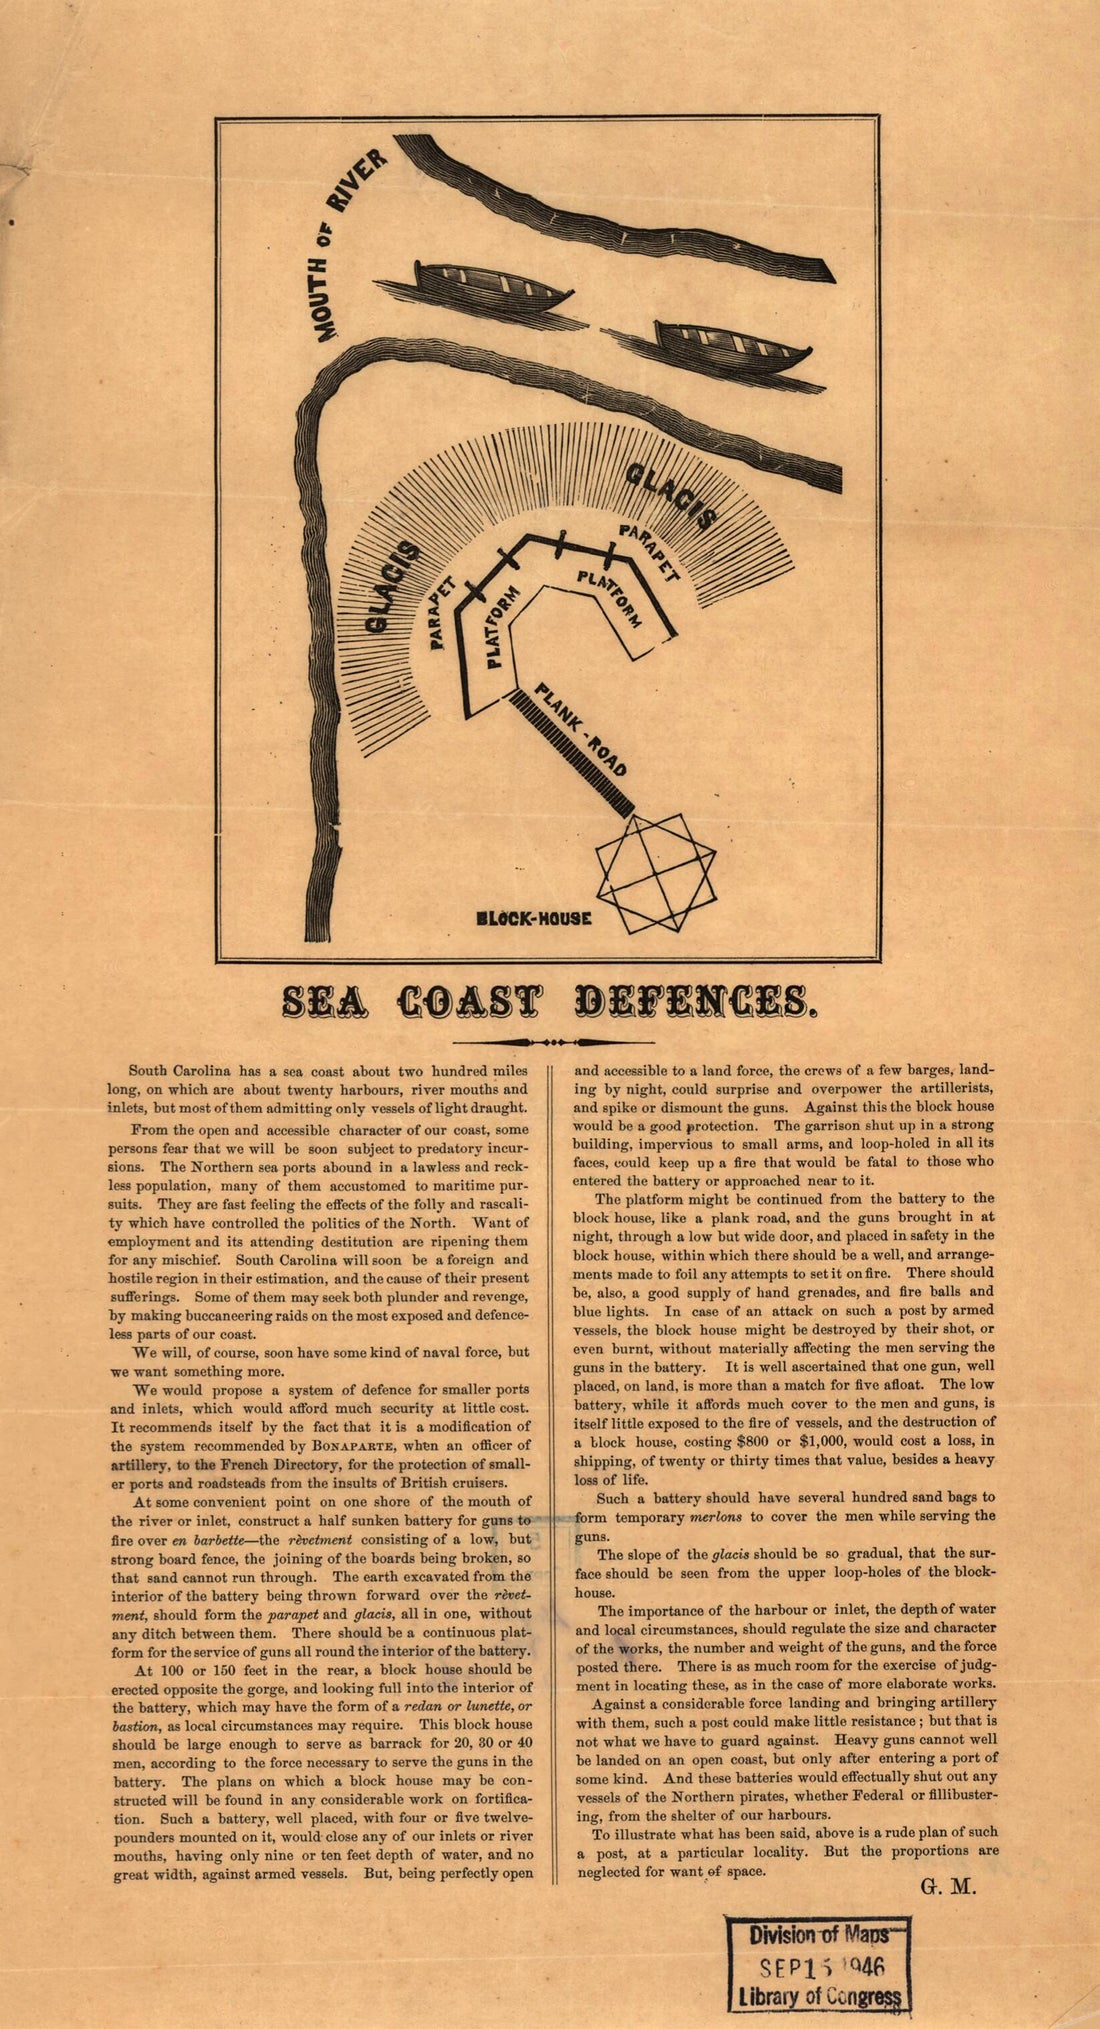 This old map of Sea Coast Defences from 1861 was created by Gabriel E. (Gabriel Edward) Manigault in 1861